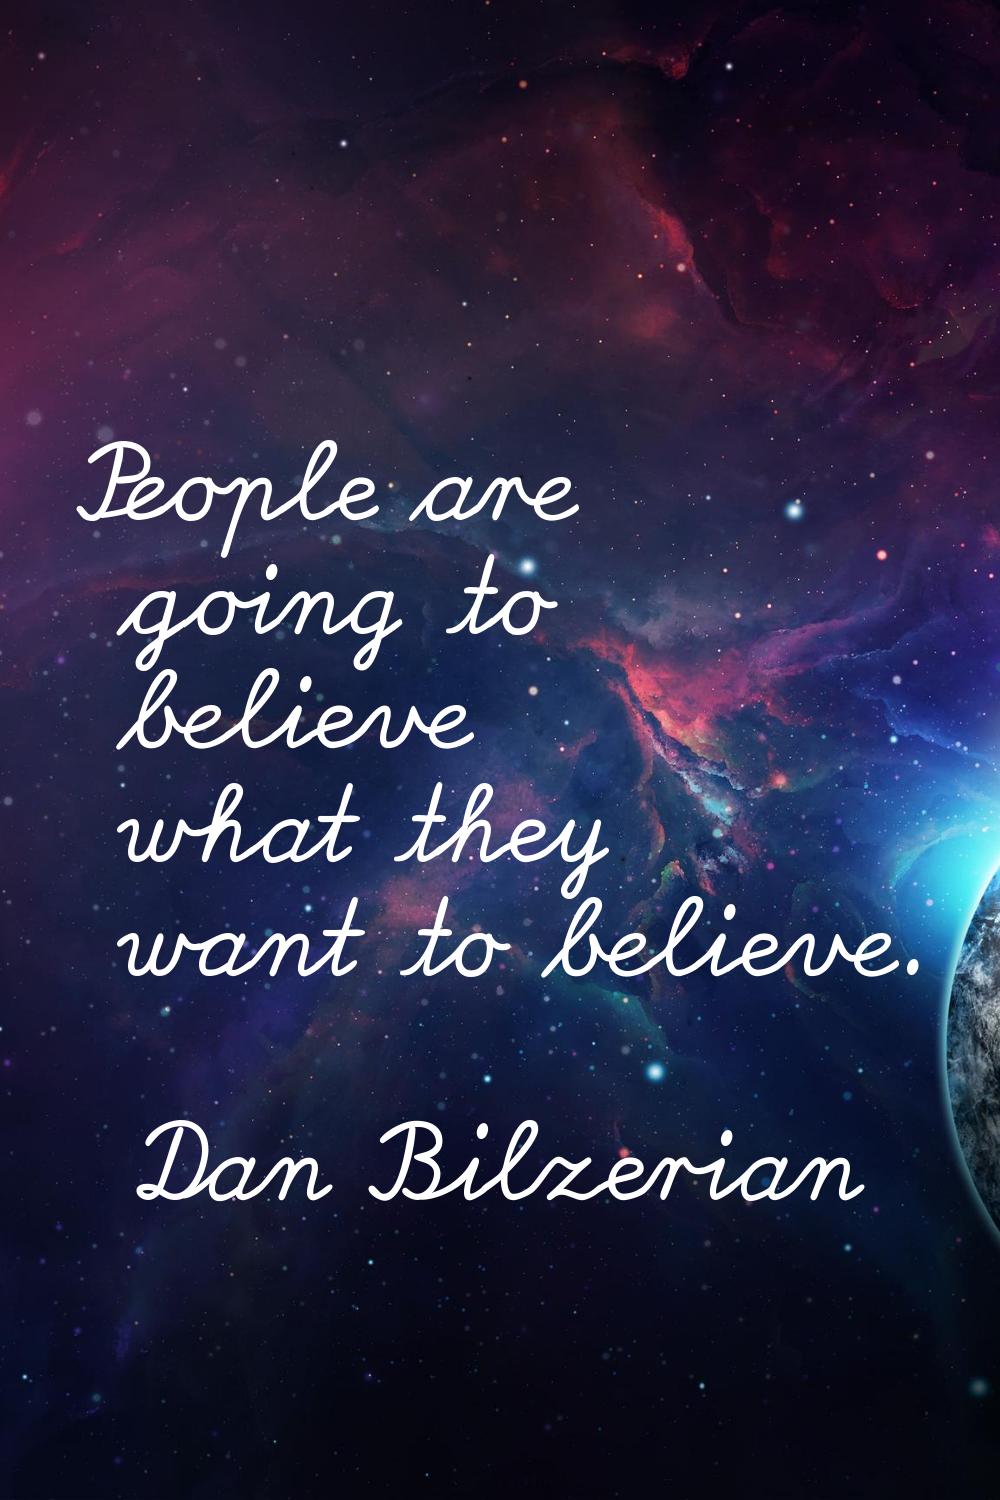 People are going to believe what they want to believe.